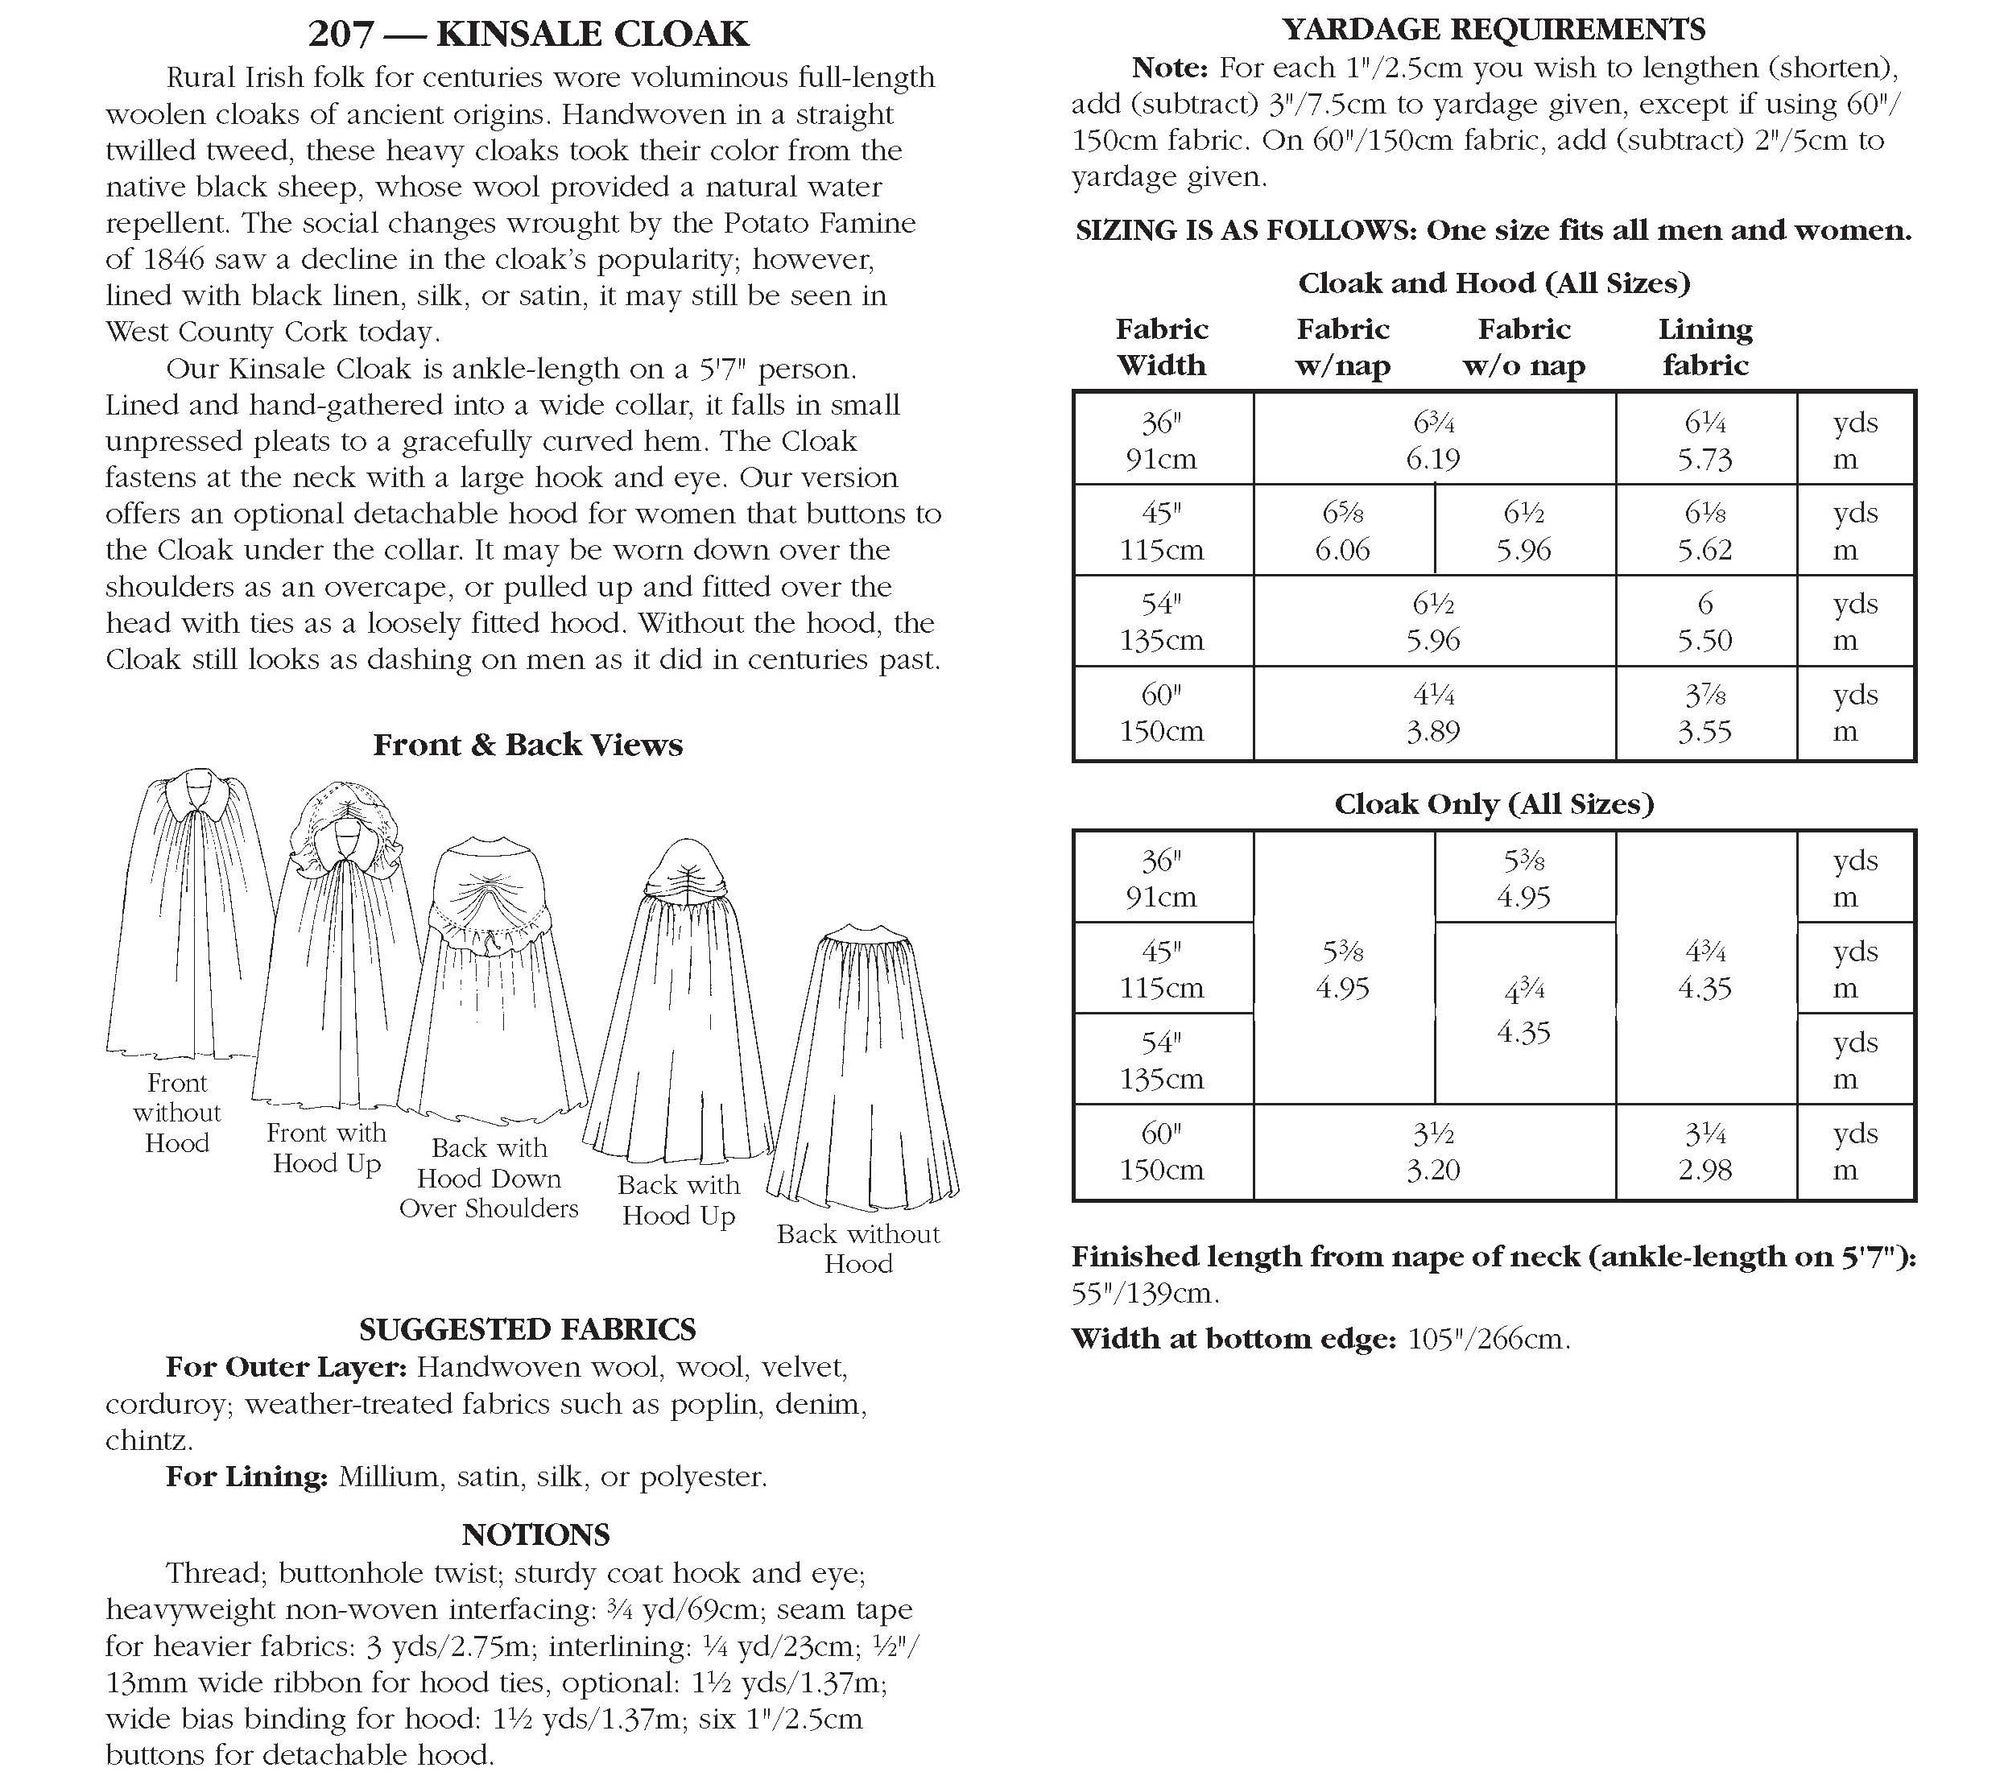 Photo of back cover showing yardage charts and size chart.  Fabric suggestions are included.